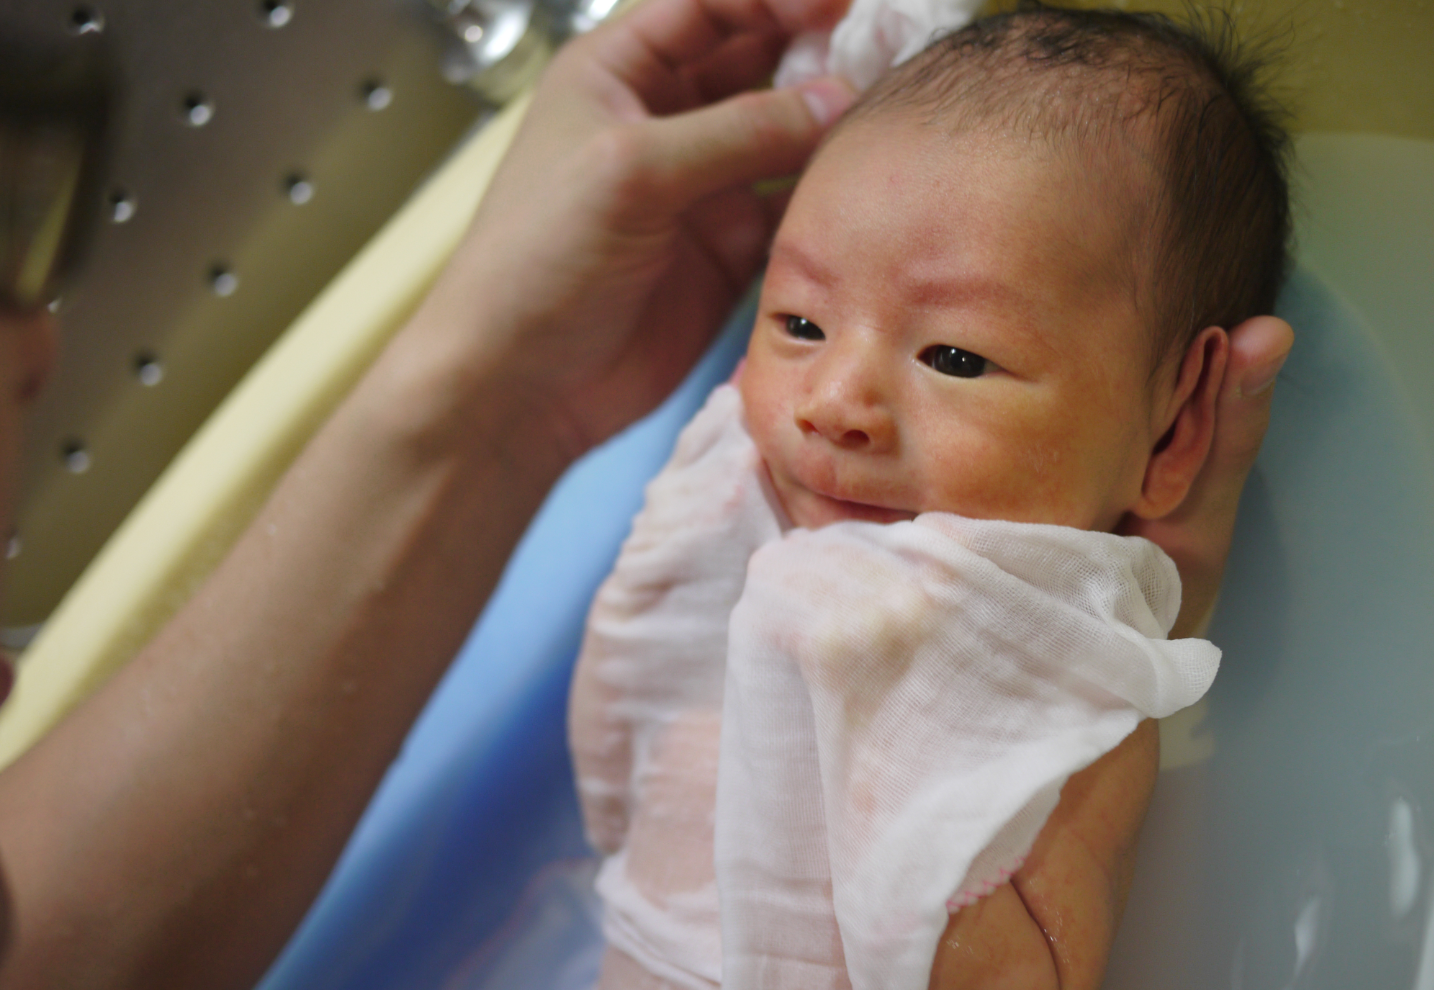 Japan to discuss health insurance coverage for childbirth